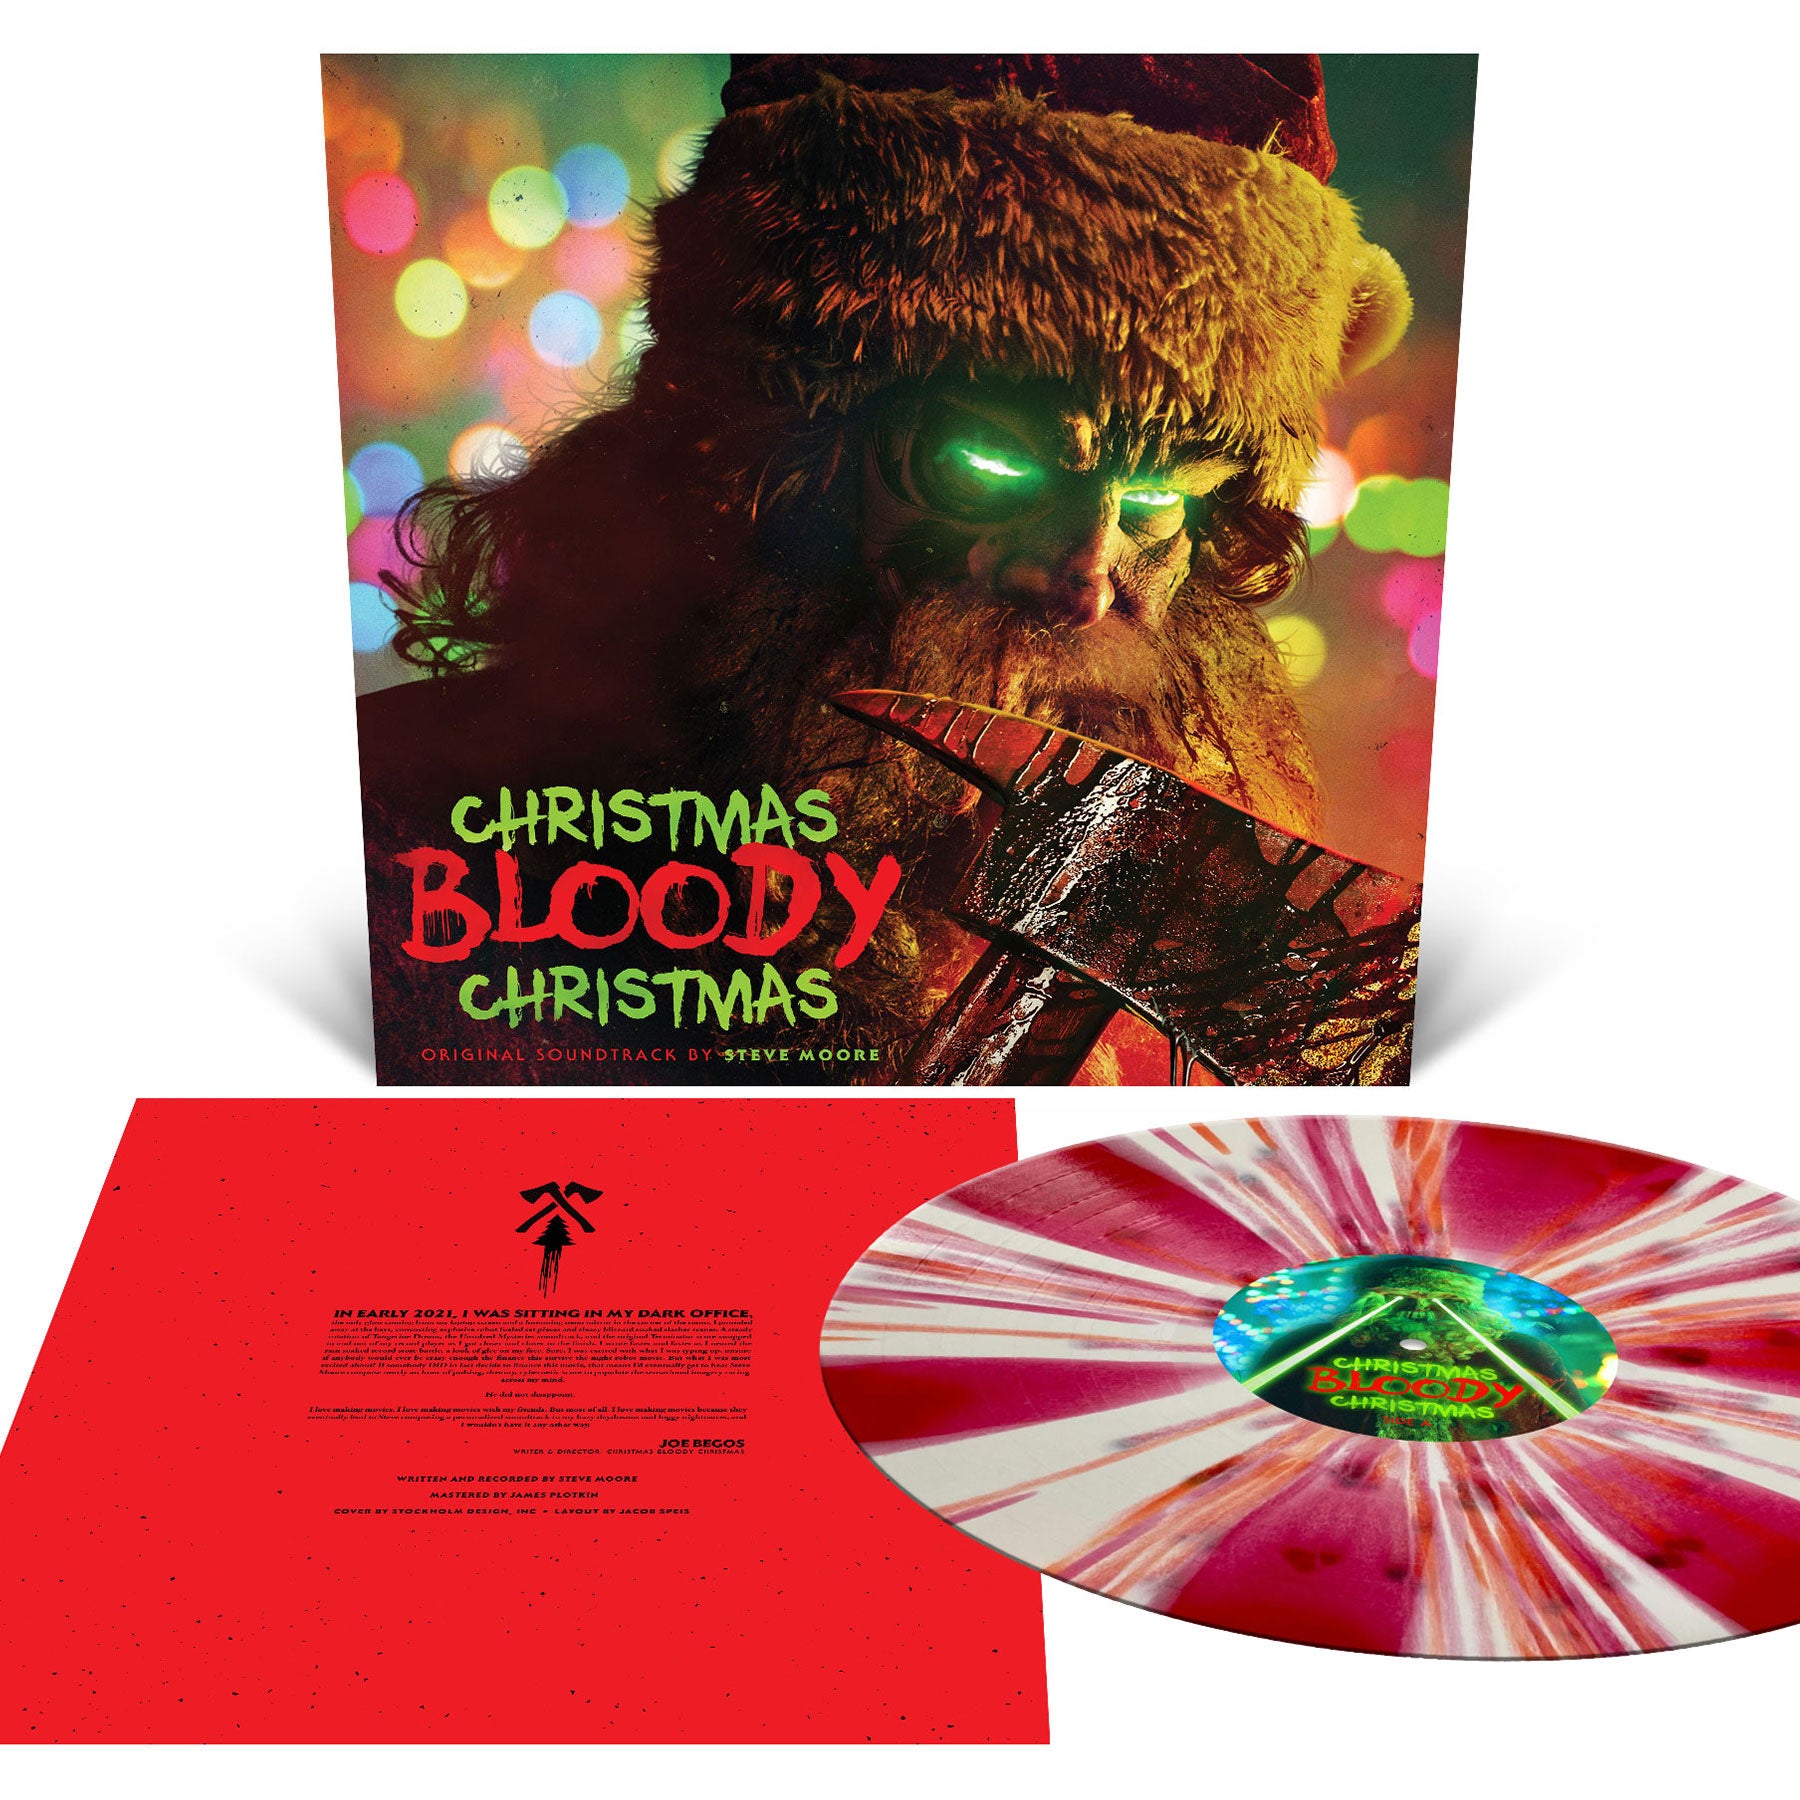 Steve Moore "Christmas Bloody Christmas (Original Motion Picture Soundtrack)" 12"